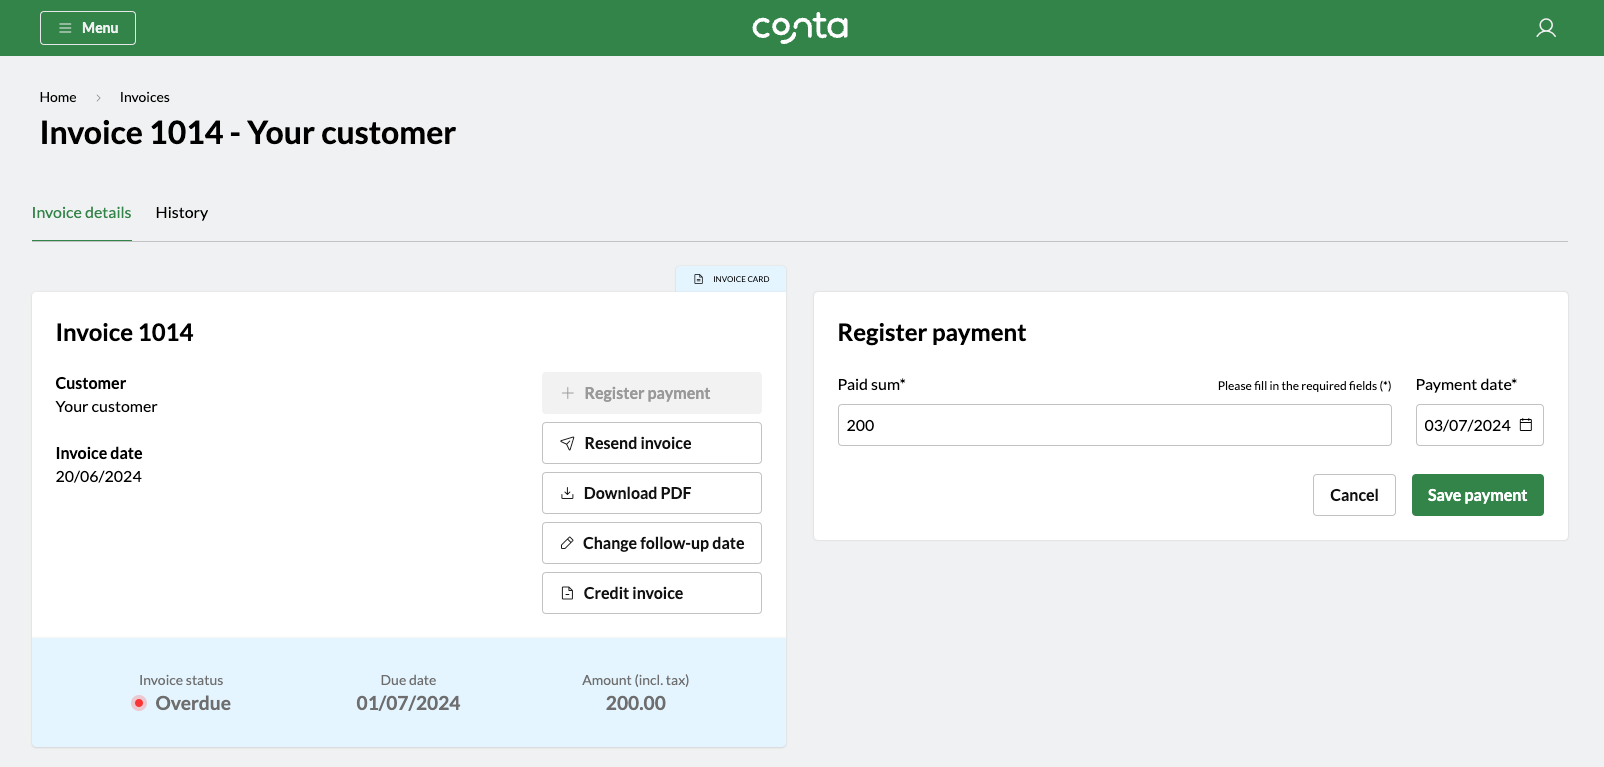 The invoice overview in Conta, where you can register payment, resend invoice, download PDF, change follow-up date and credit invoice